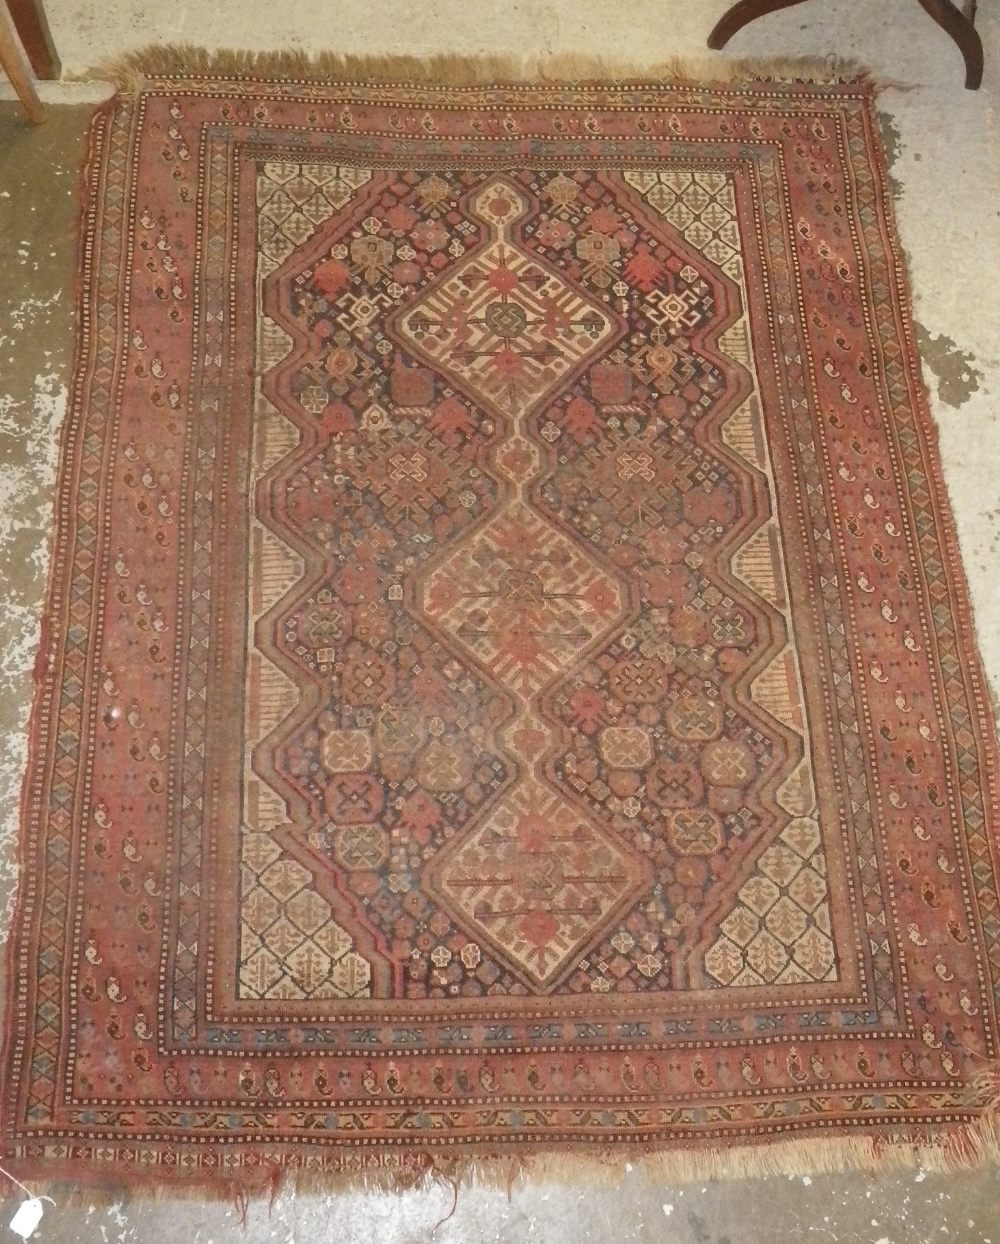 A russet ground Persian rug with stylised central panel with three central medallions, 68" x 52" (